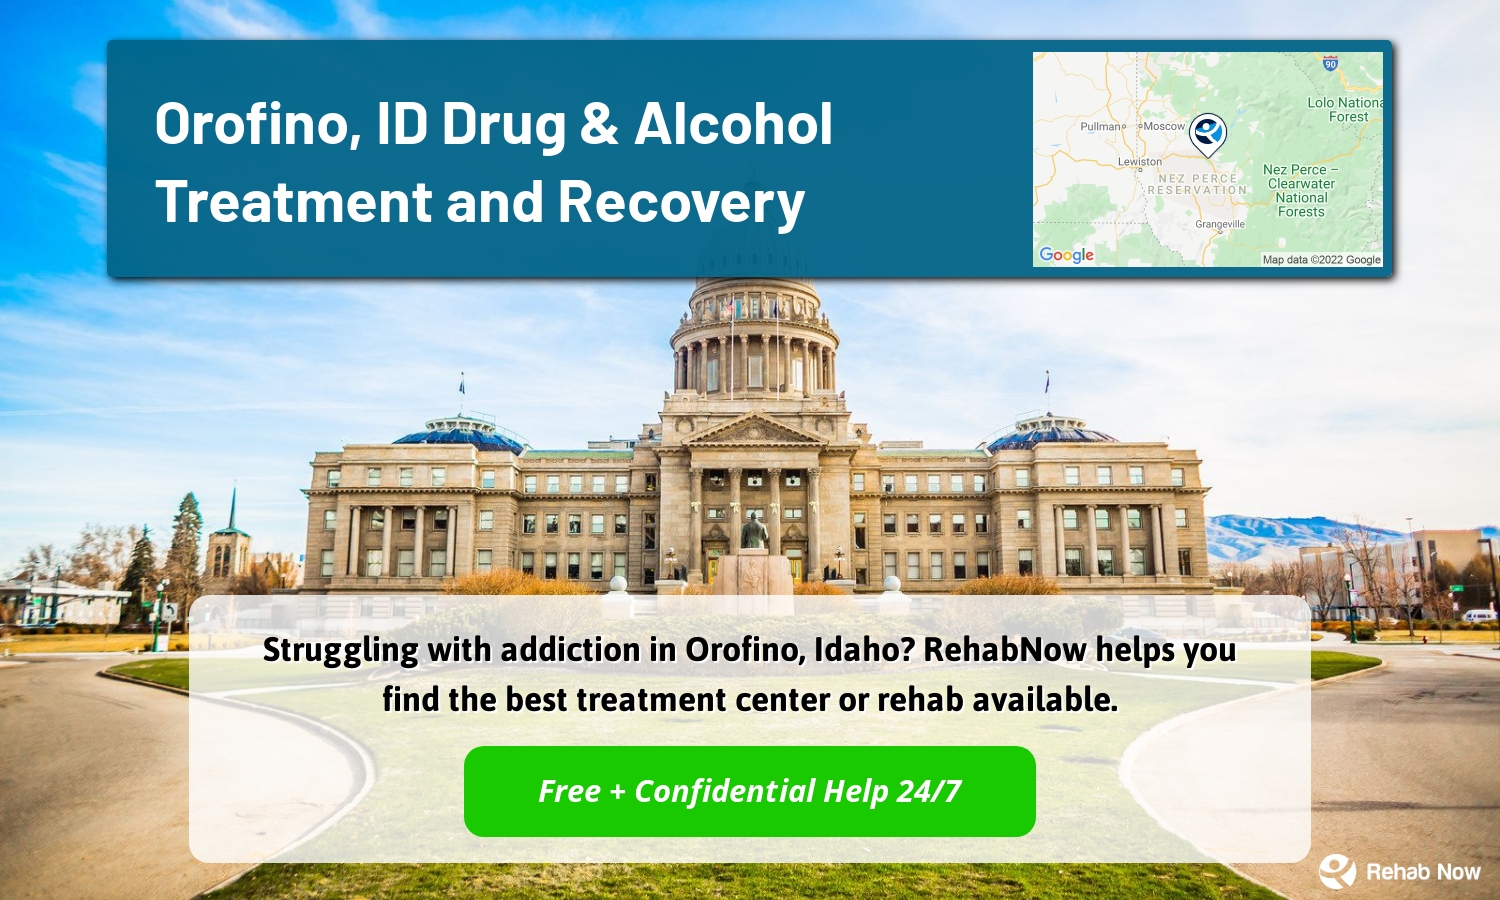 Struggling with addiction in Orofino, Idaho? RehabNow helps you find the best treatment center or rehab available.